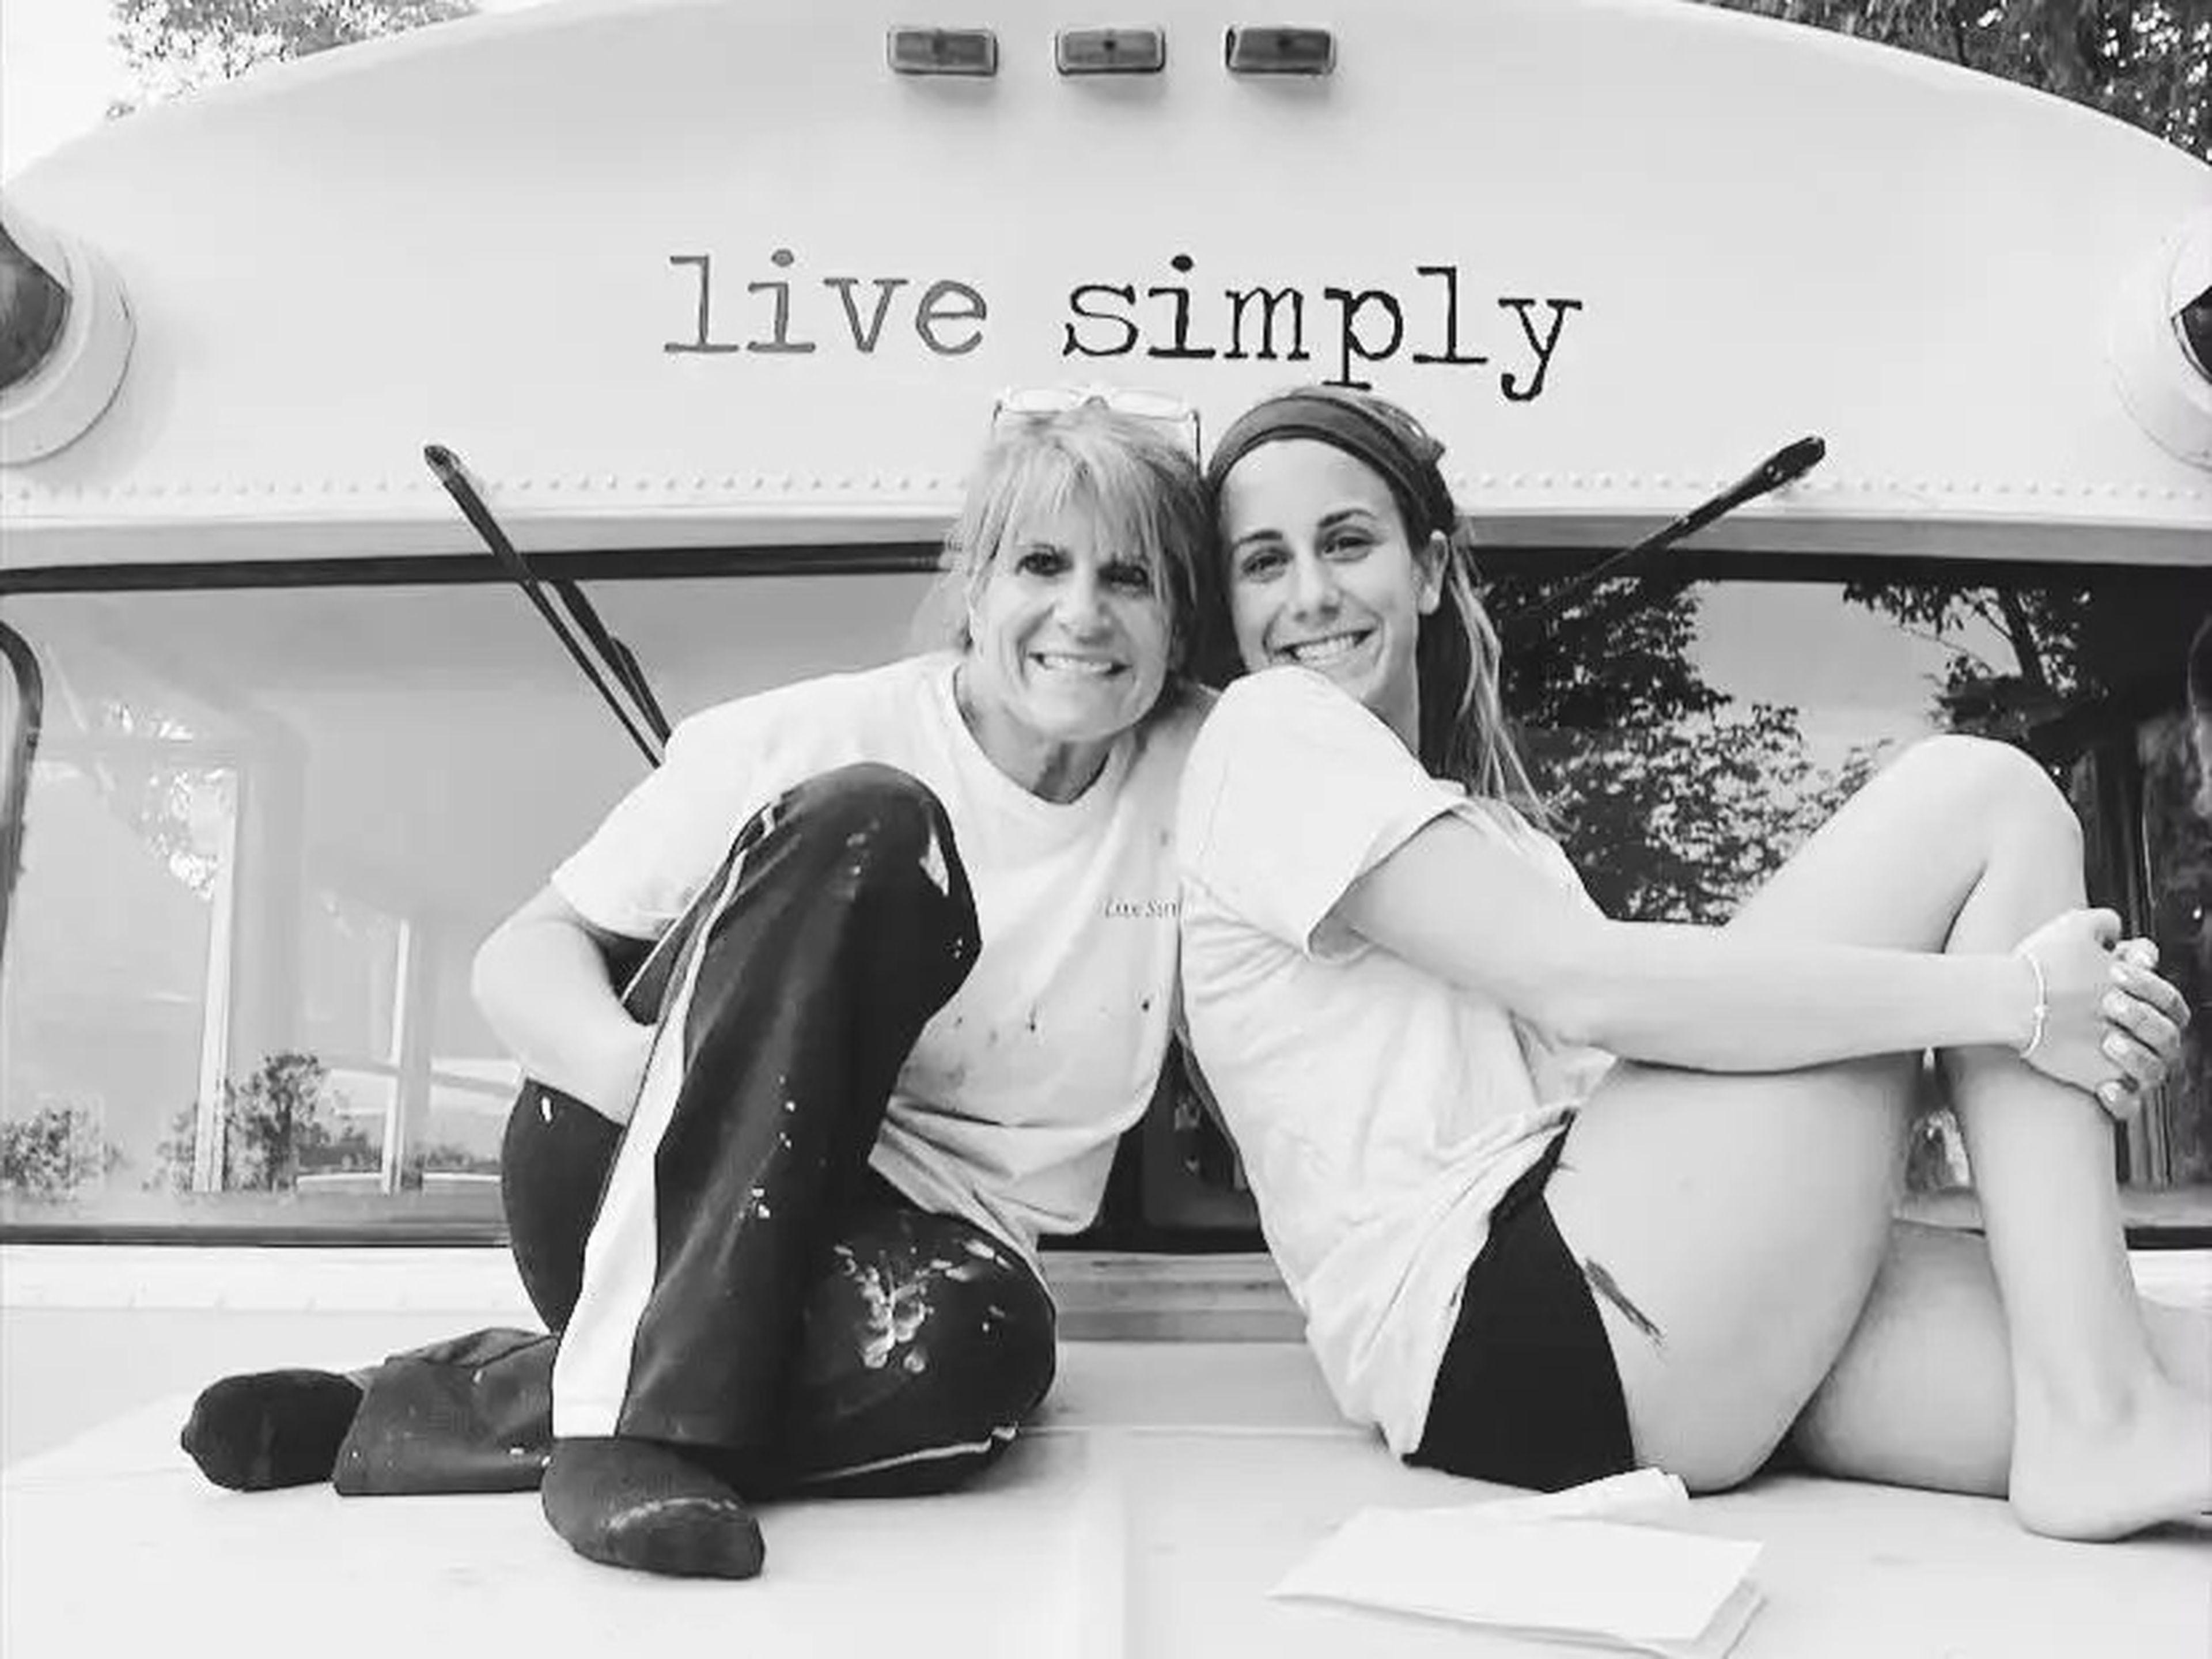 Live Simply Buses